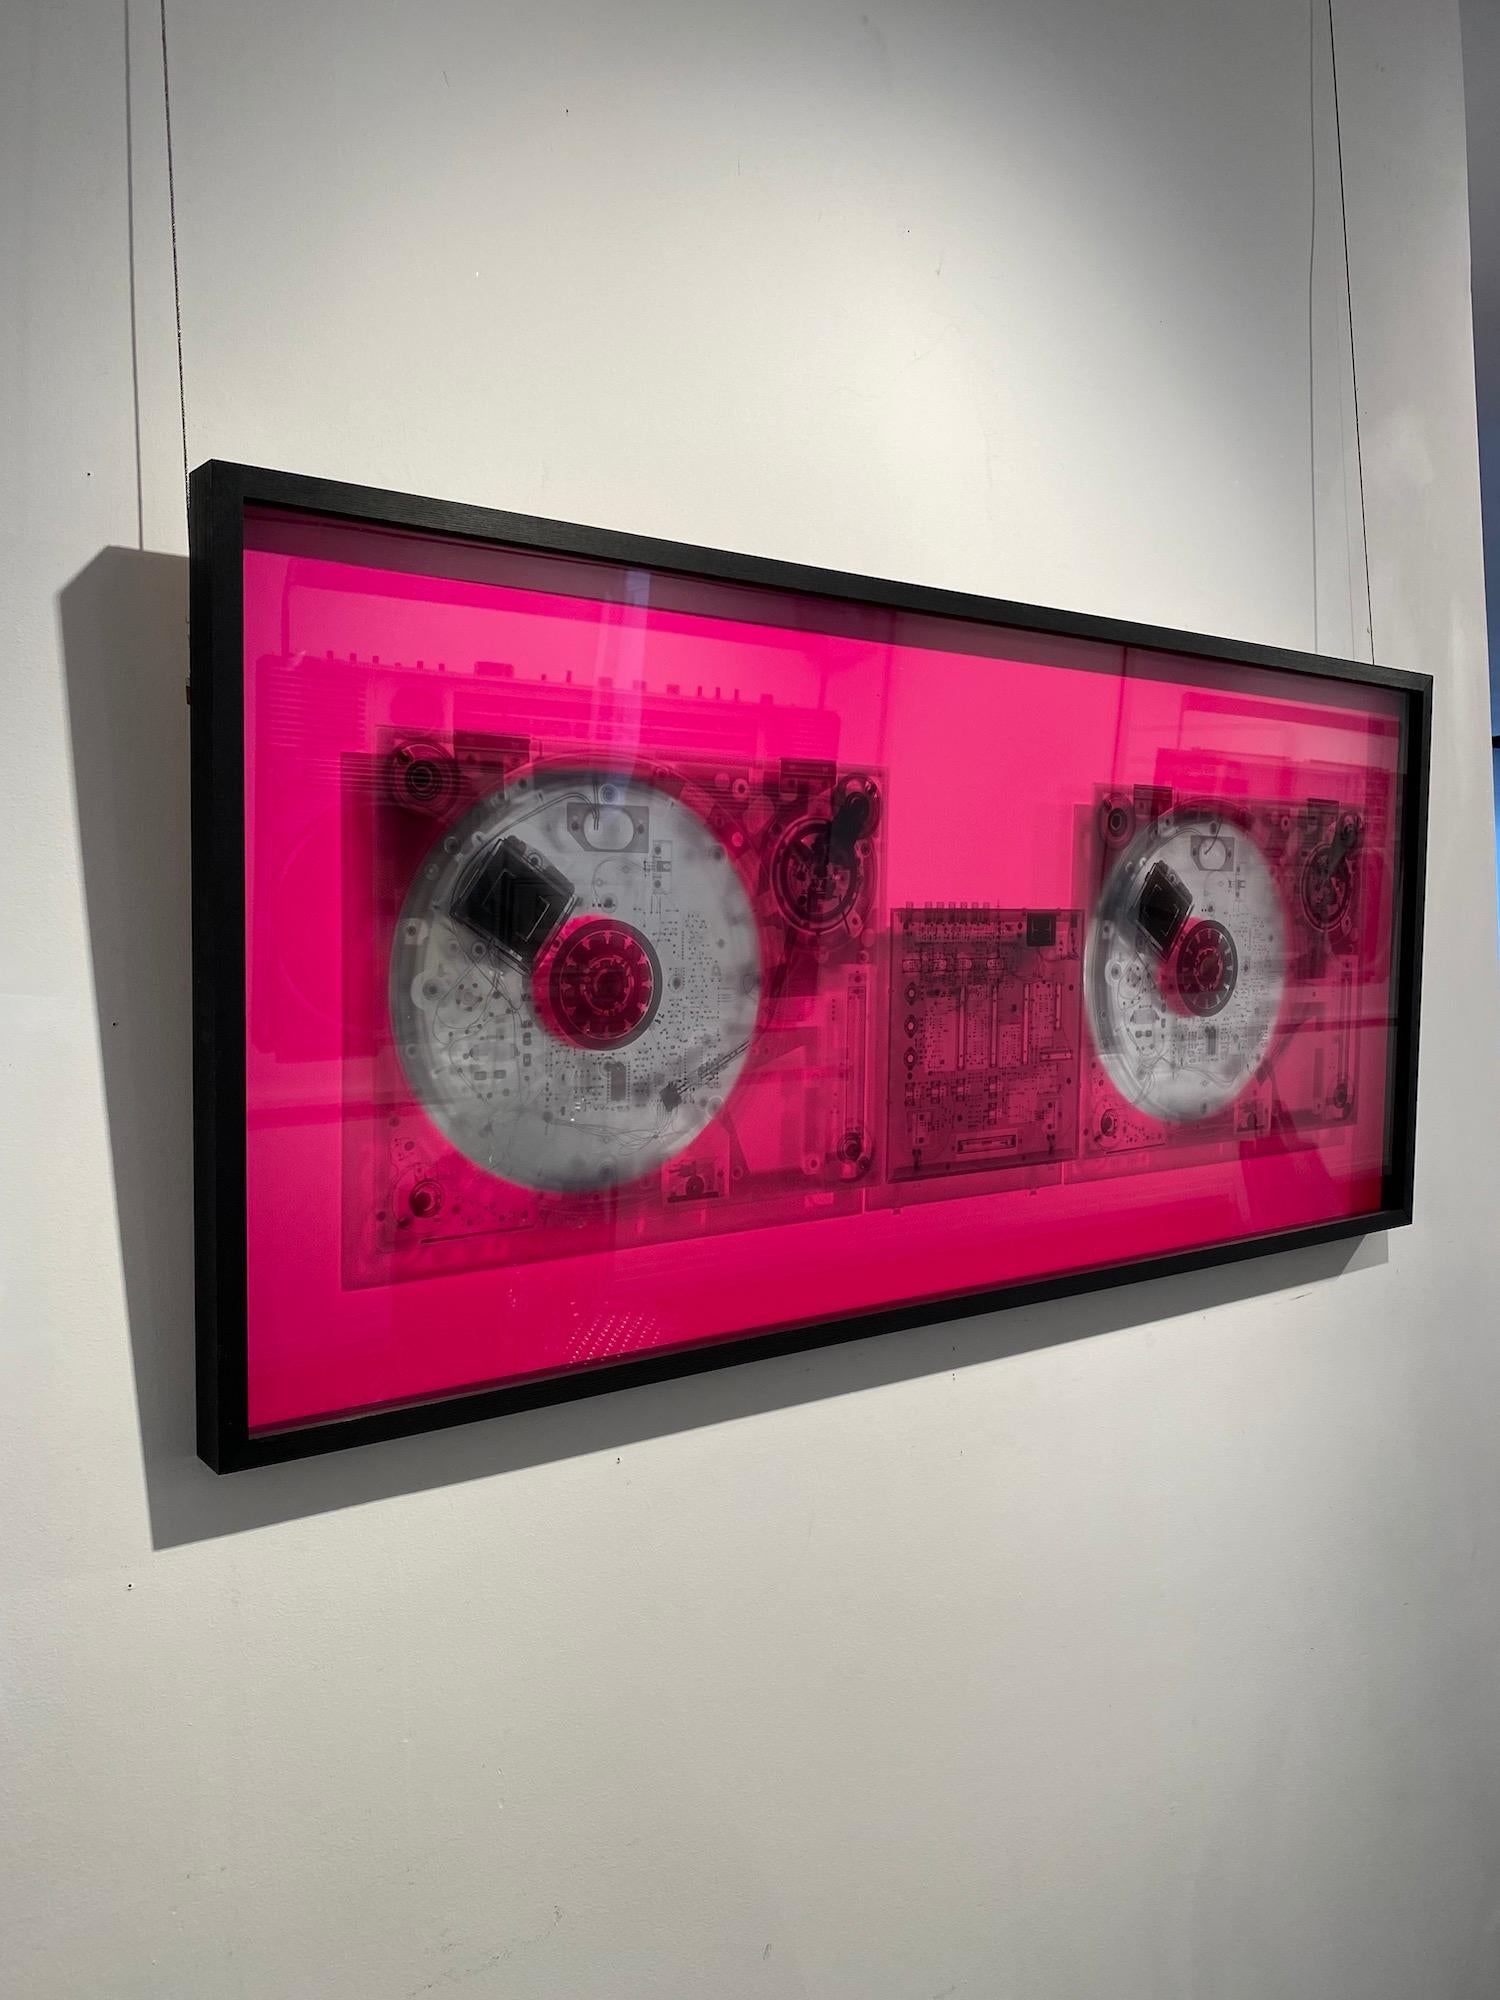 Nick Veasey
Pink Decks
23 x 52 inches, AP Edition
Digital C Print
Framed in black
Signed and numbered by artist

Currently on display at Art Angels

Nick Veasey
X-Ray
Chanel
DJ
Music
Decks
Photography